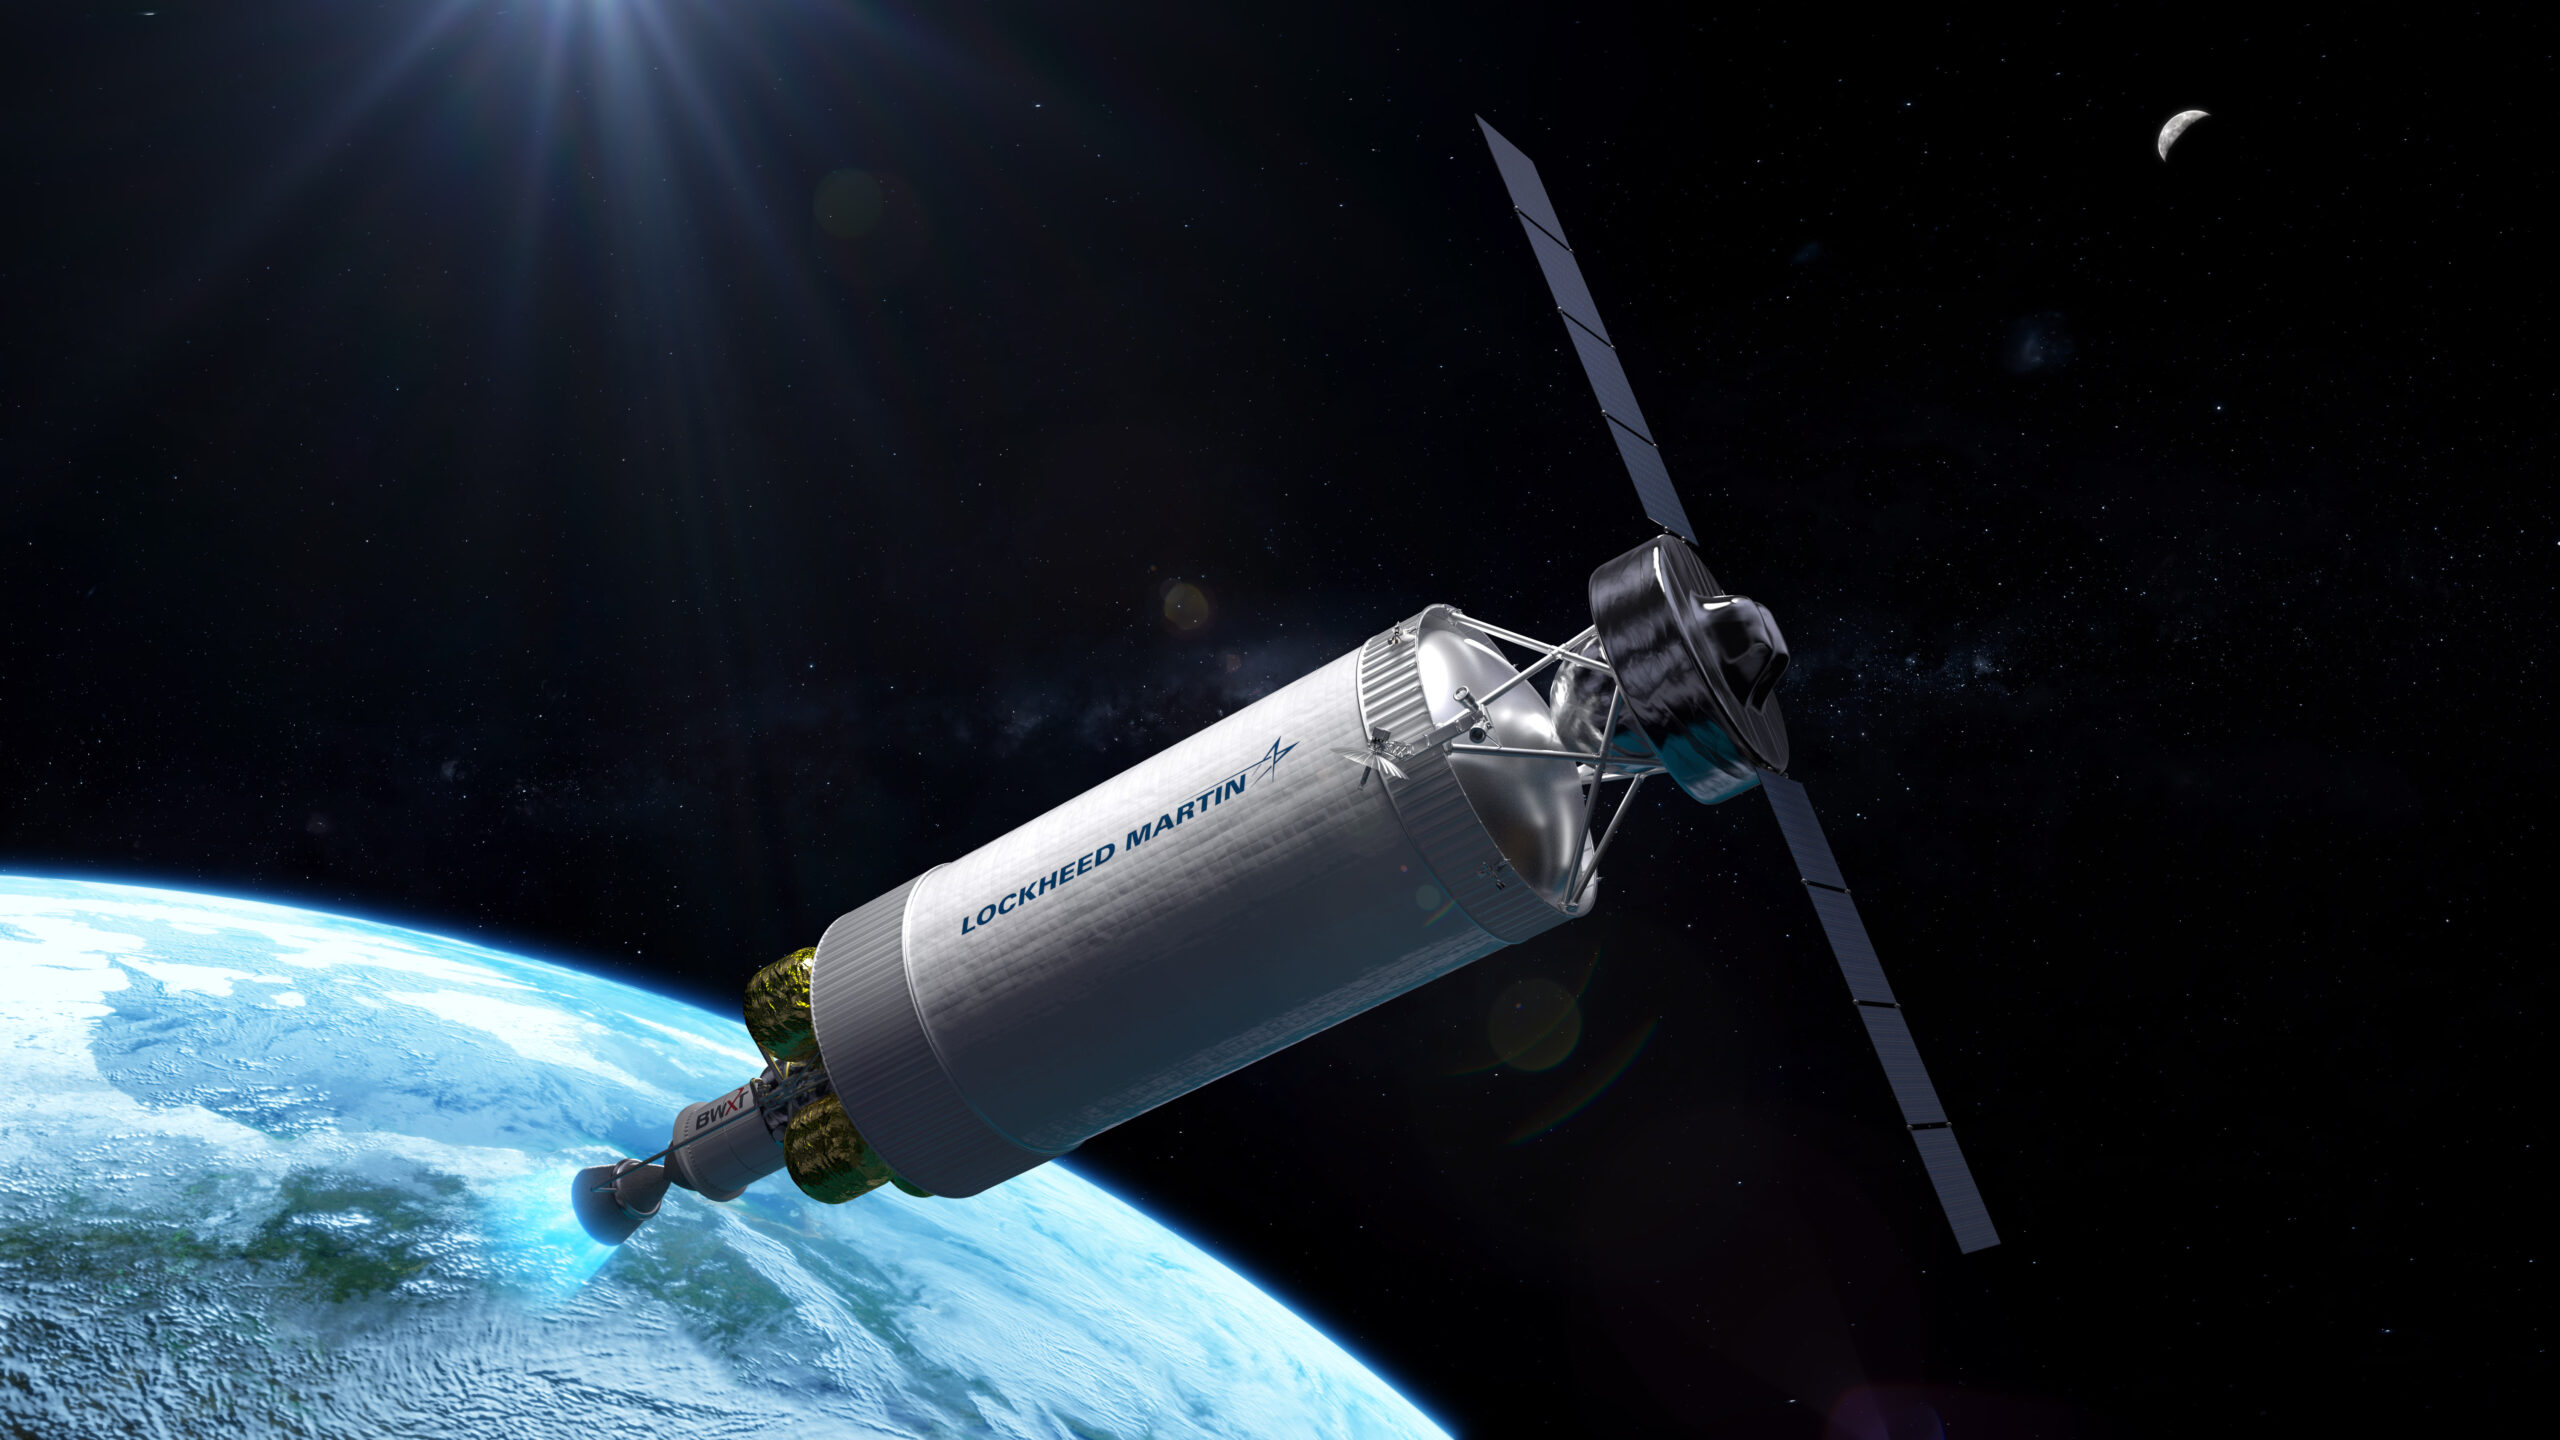 Illustration of a the DRACO spacecraft being developed by Lockheed Martin for DARPA that will demonstrate thermal nuclear engine technology.